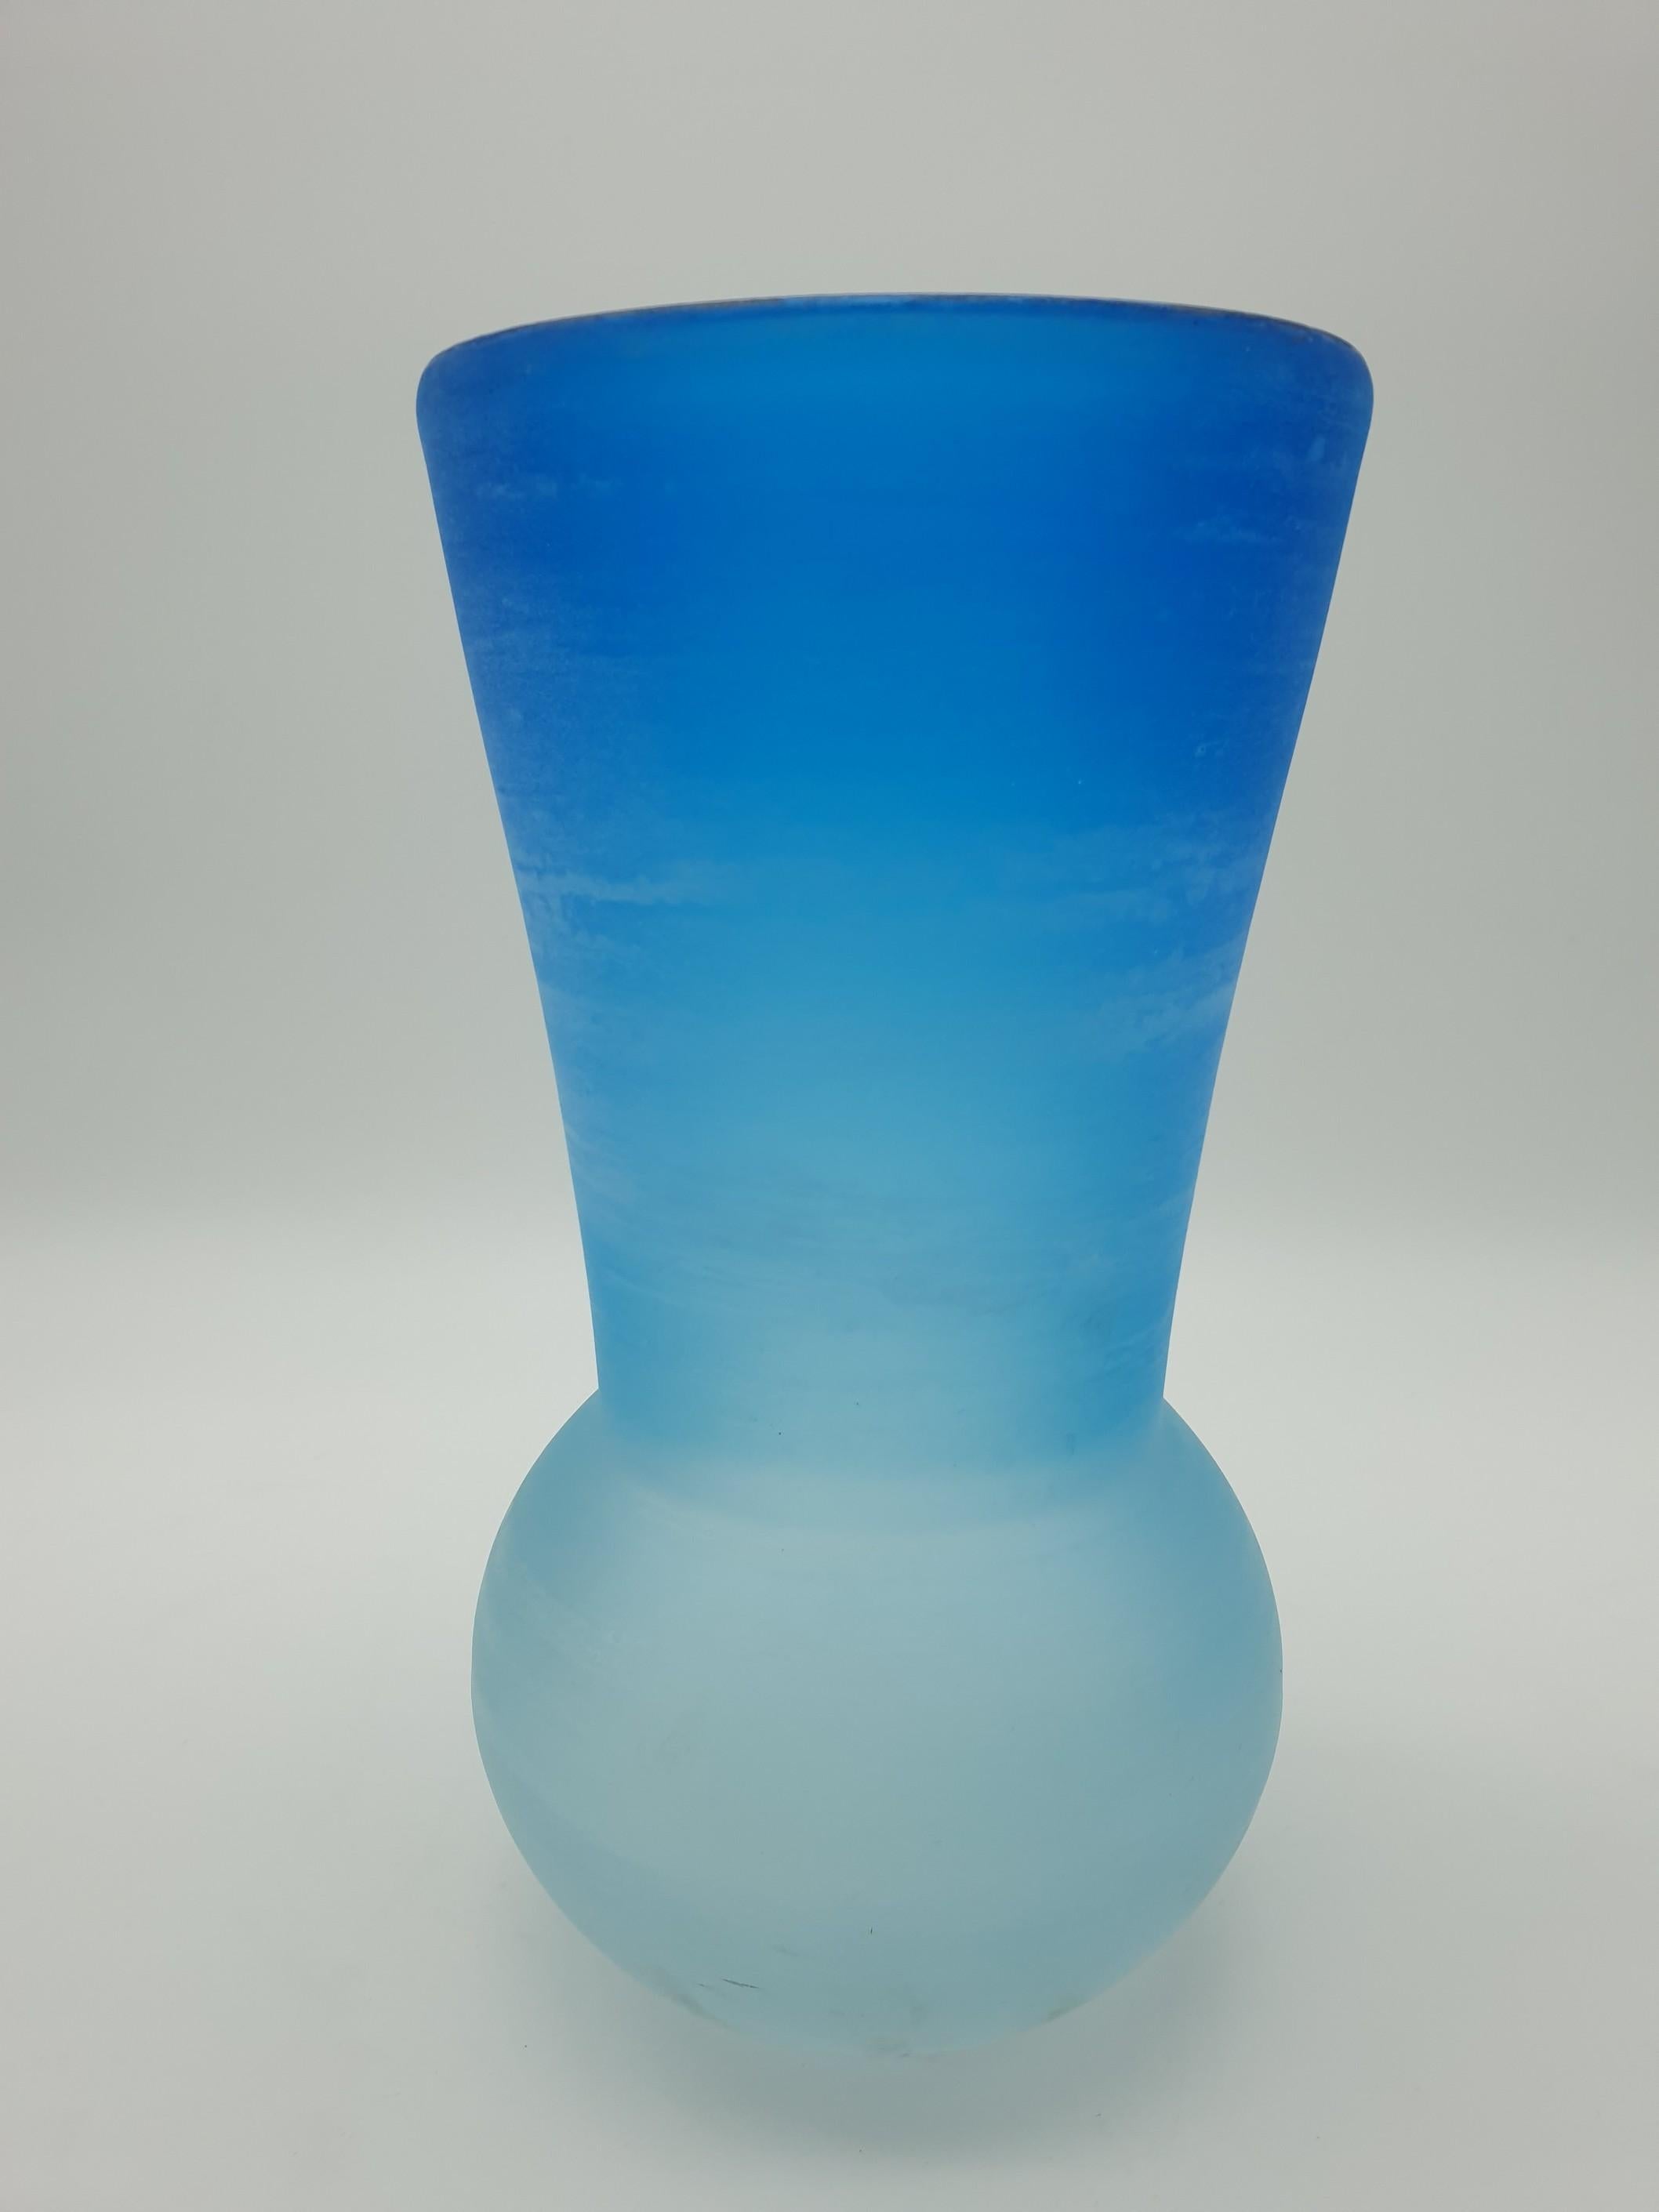 A delicate blue “scavo” glass vase by Gino Cenedese e Figlio, completely handmade in Murano in the mid-1980s. This modern vase is a refined example of simplicity in design, distinctive of all items in the Cenedese’s “scavo” collection, a tulip bulb